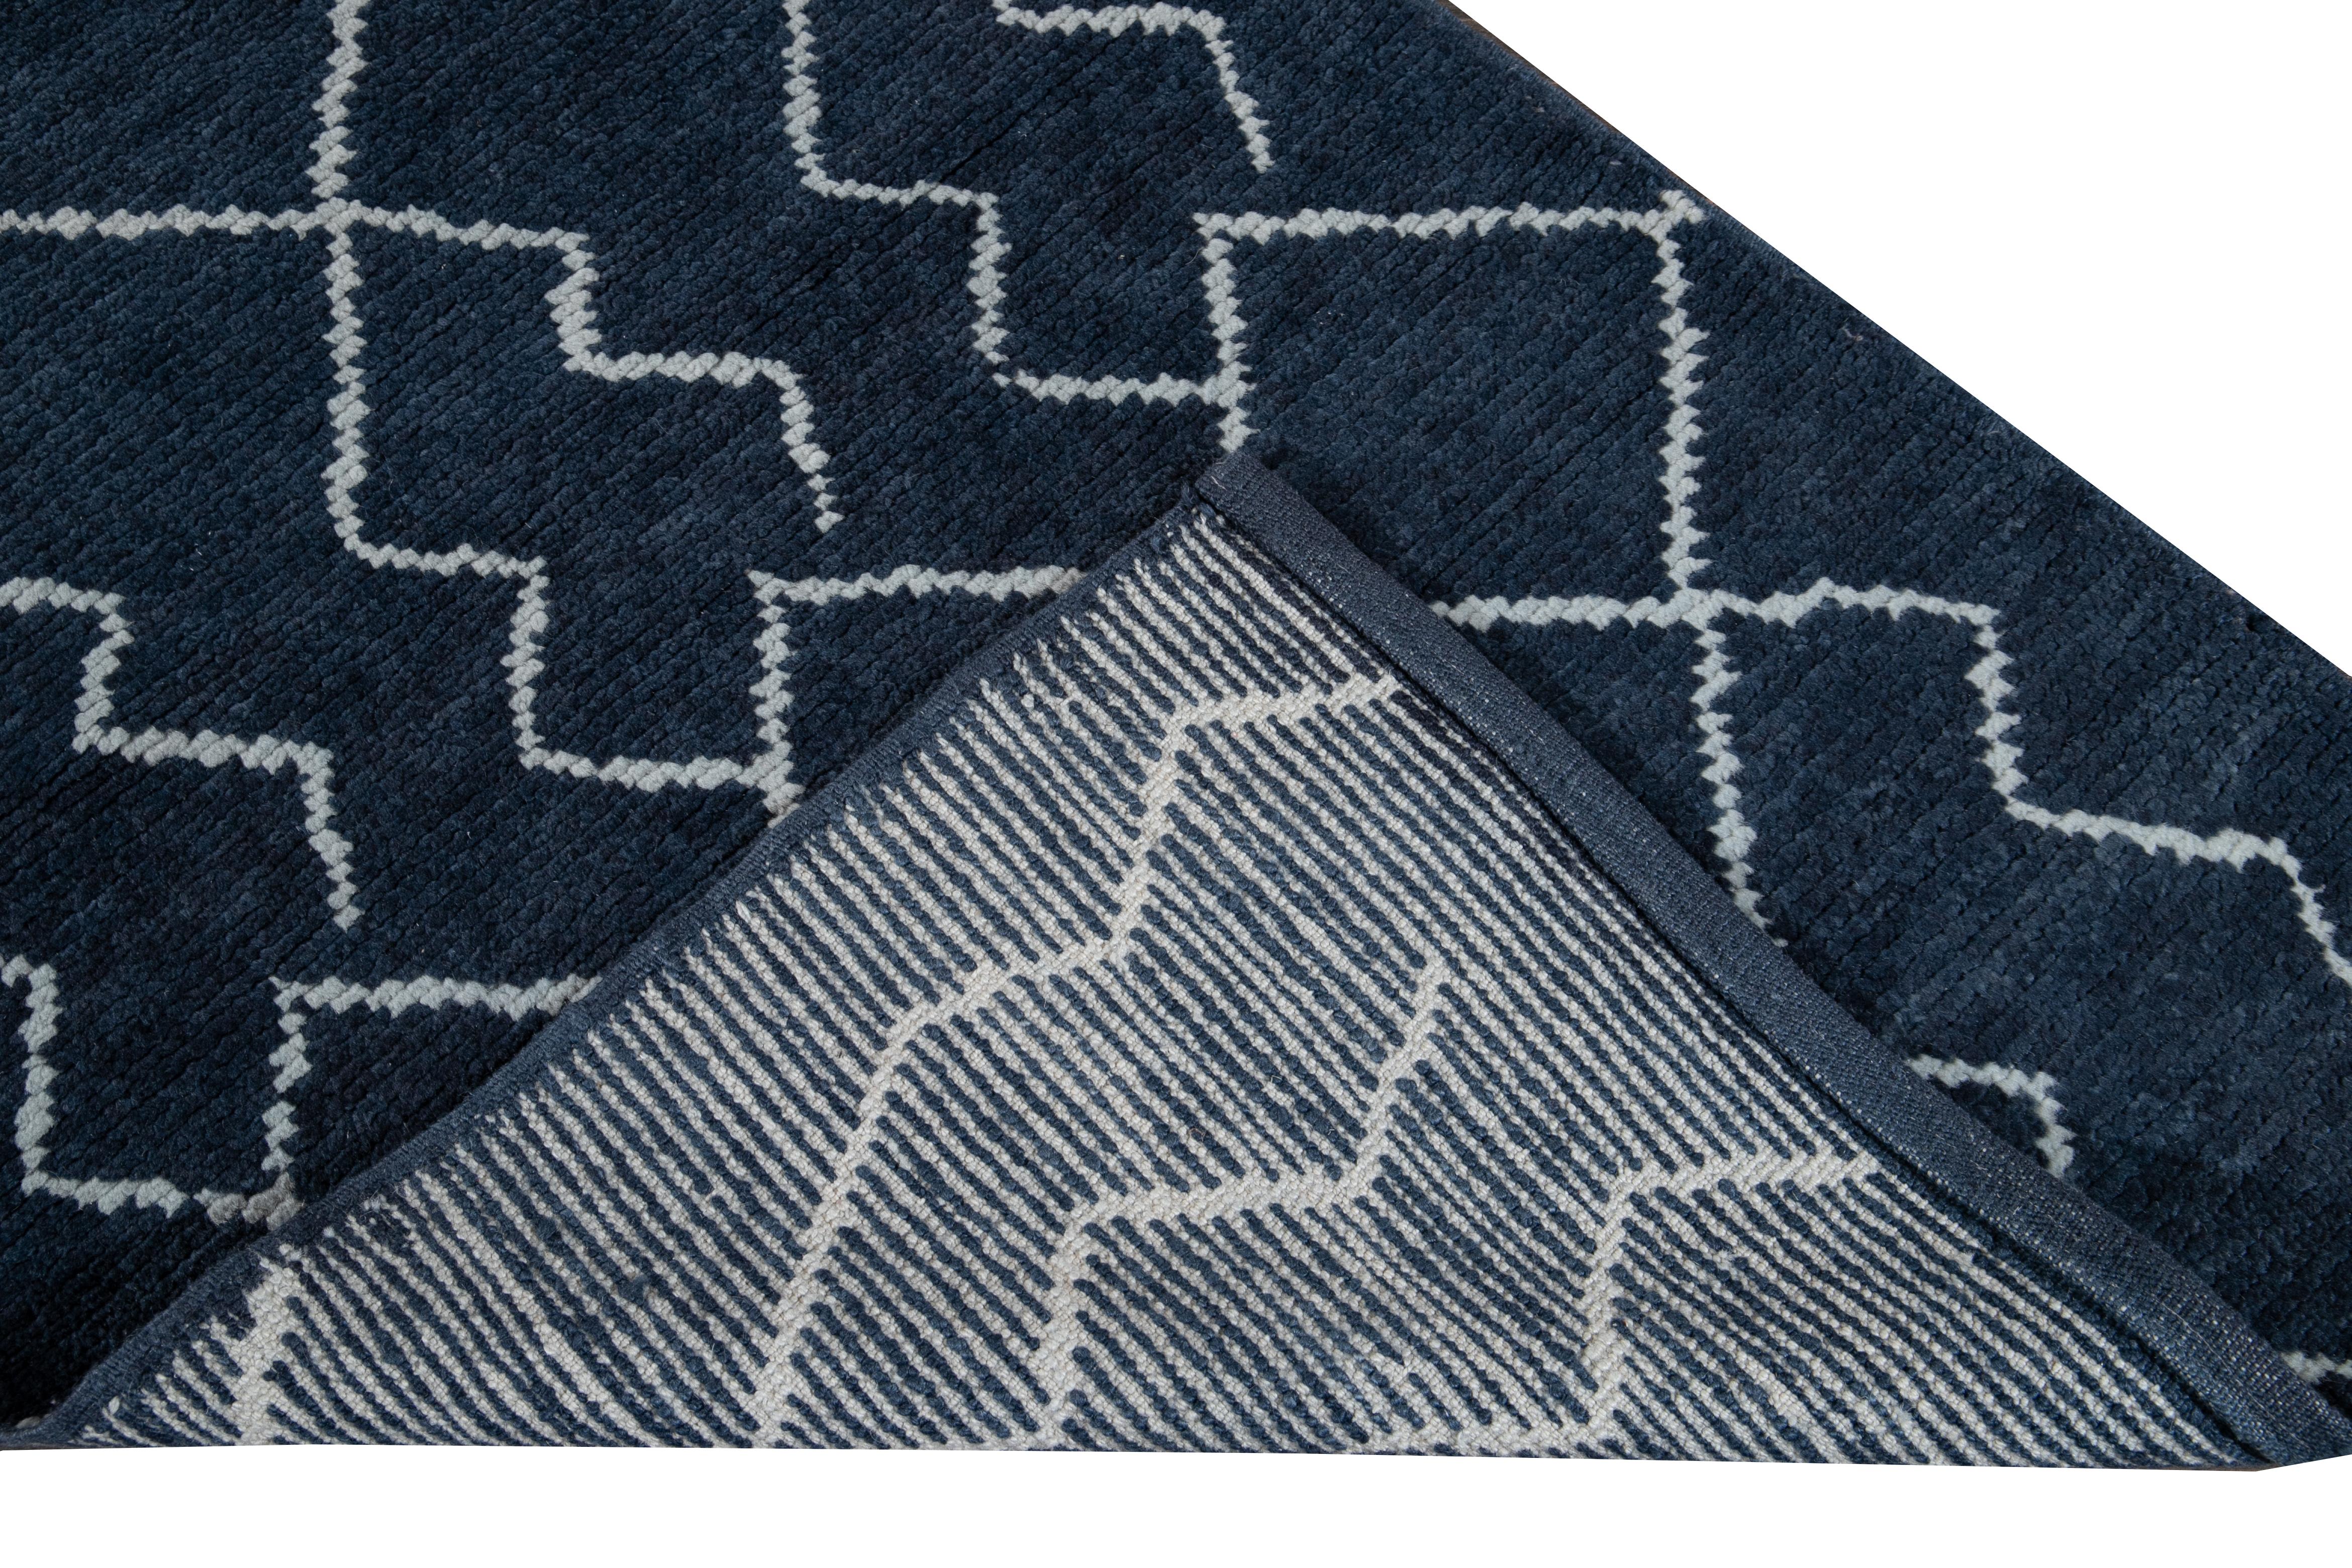 Beautiful contemporary Moroccan style runner hand knotted wool rug with a navy-blue field. This modern rug has an ivory accent in a gorgeous all-over geometric tribal design.

This rug measures: 3'1' x 12'2